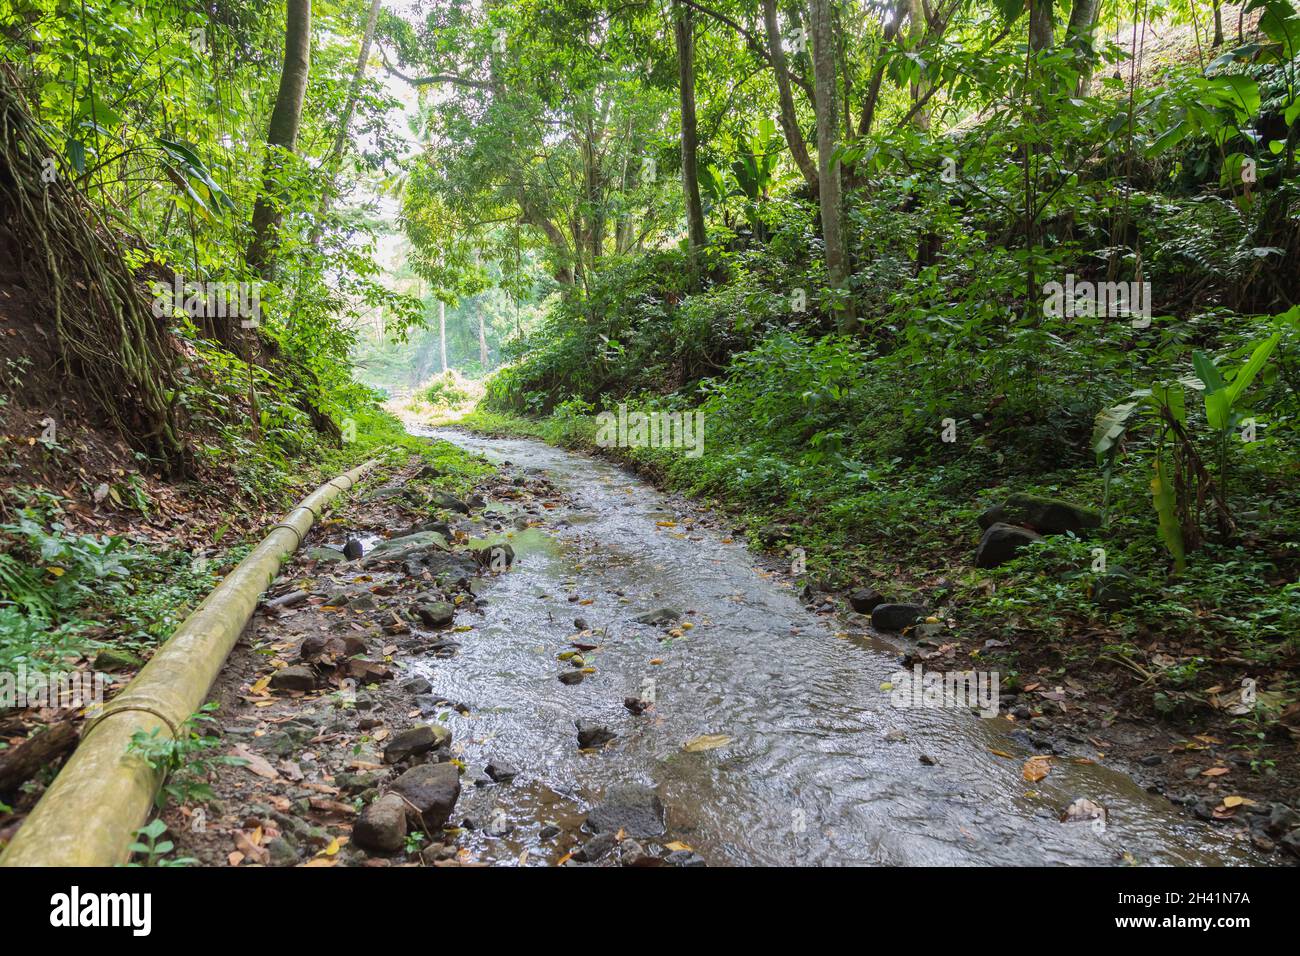 tropical landscape of a forest area Stock Photo